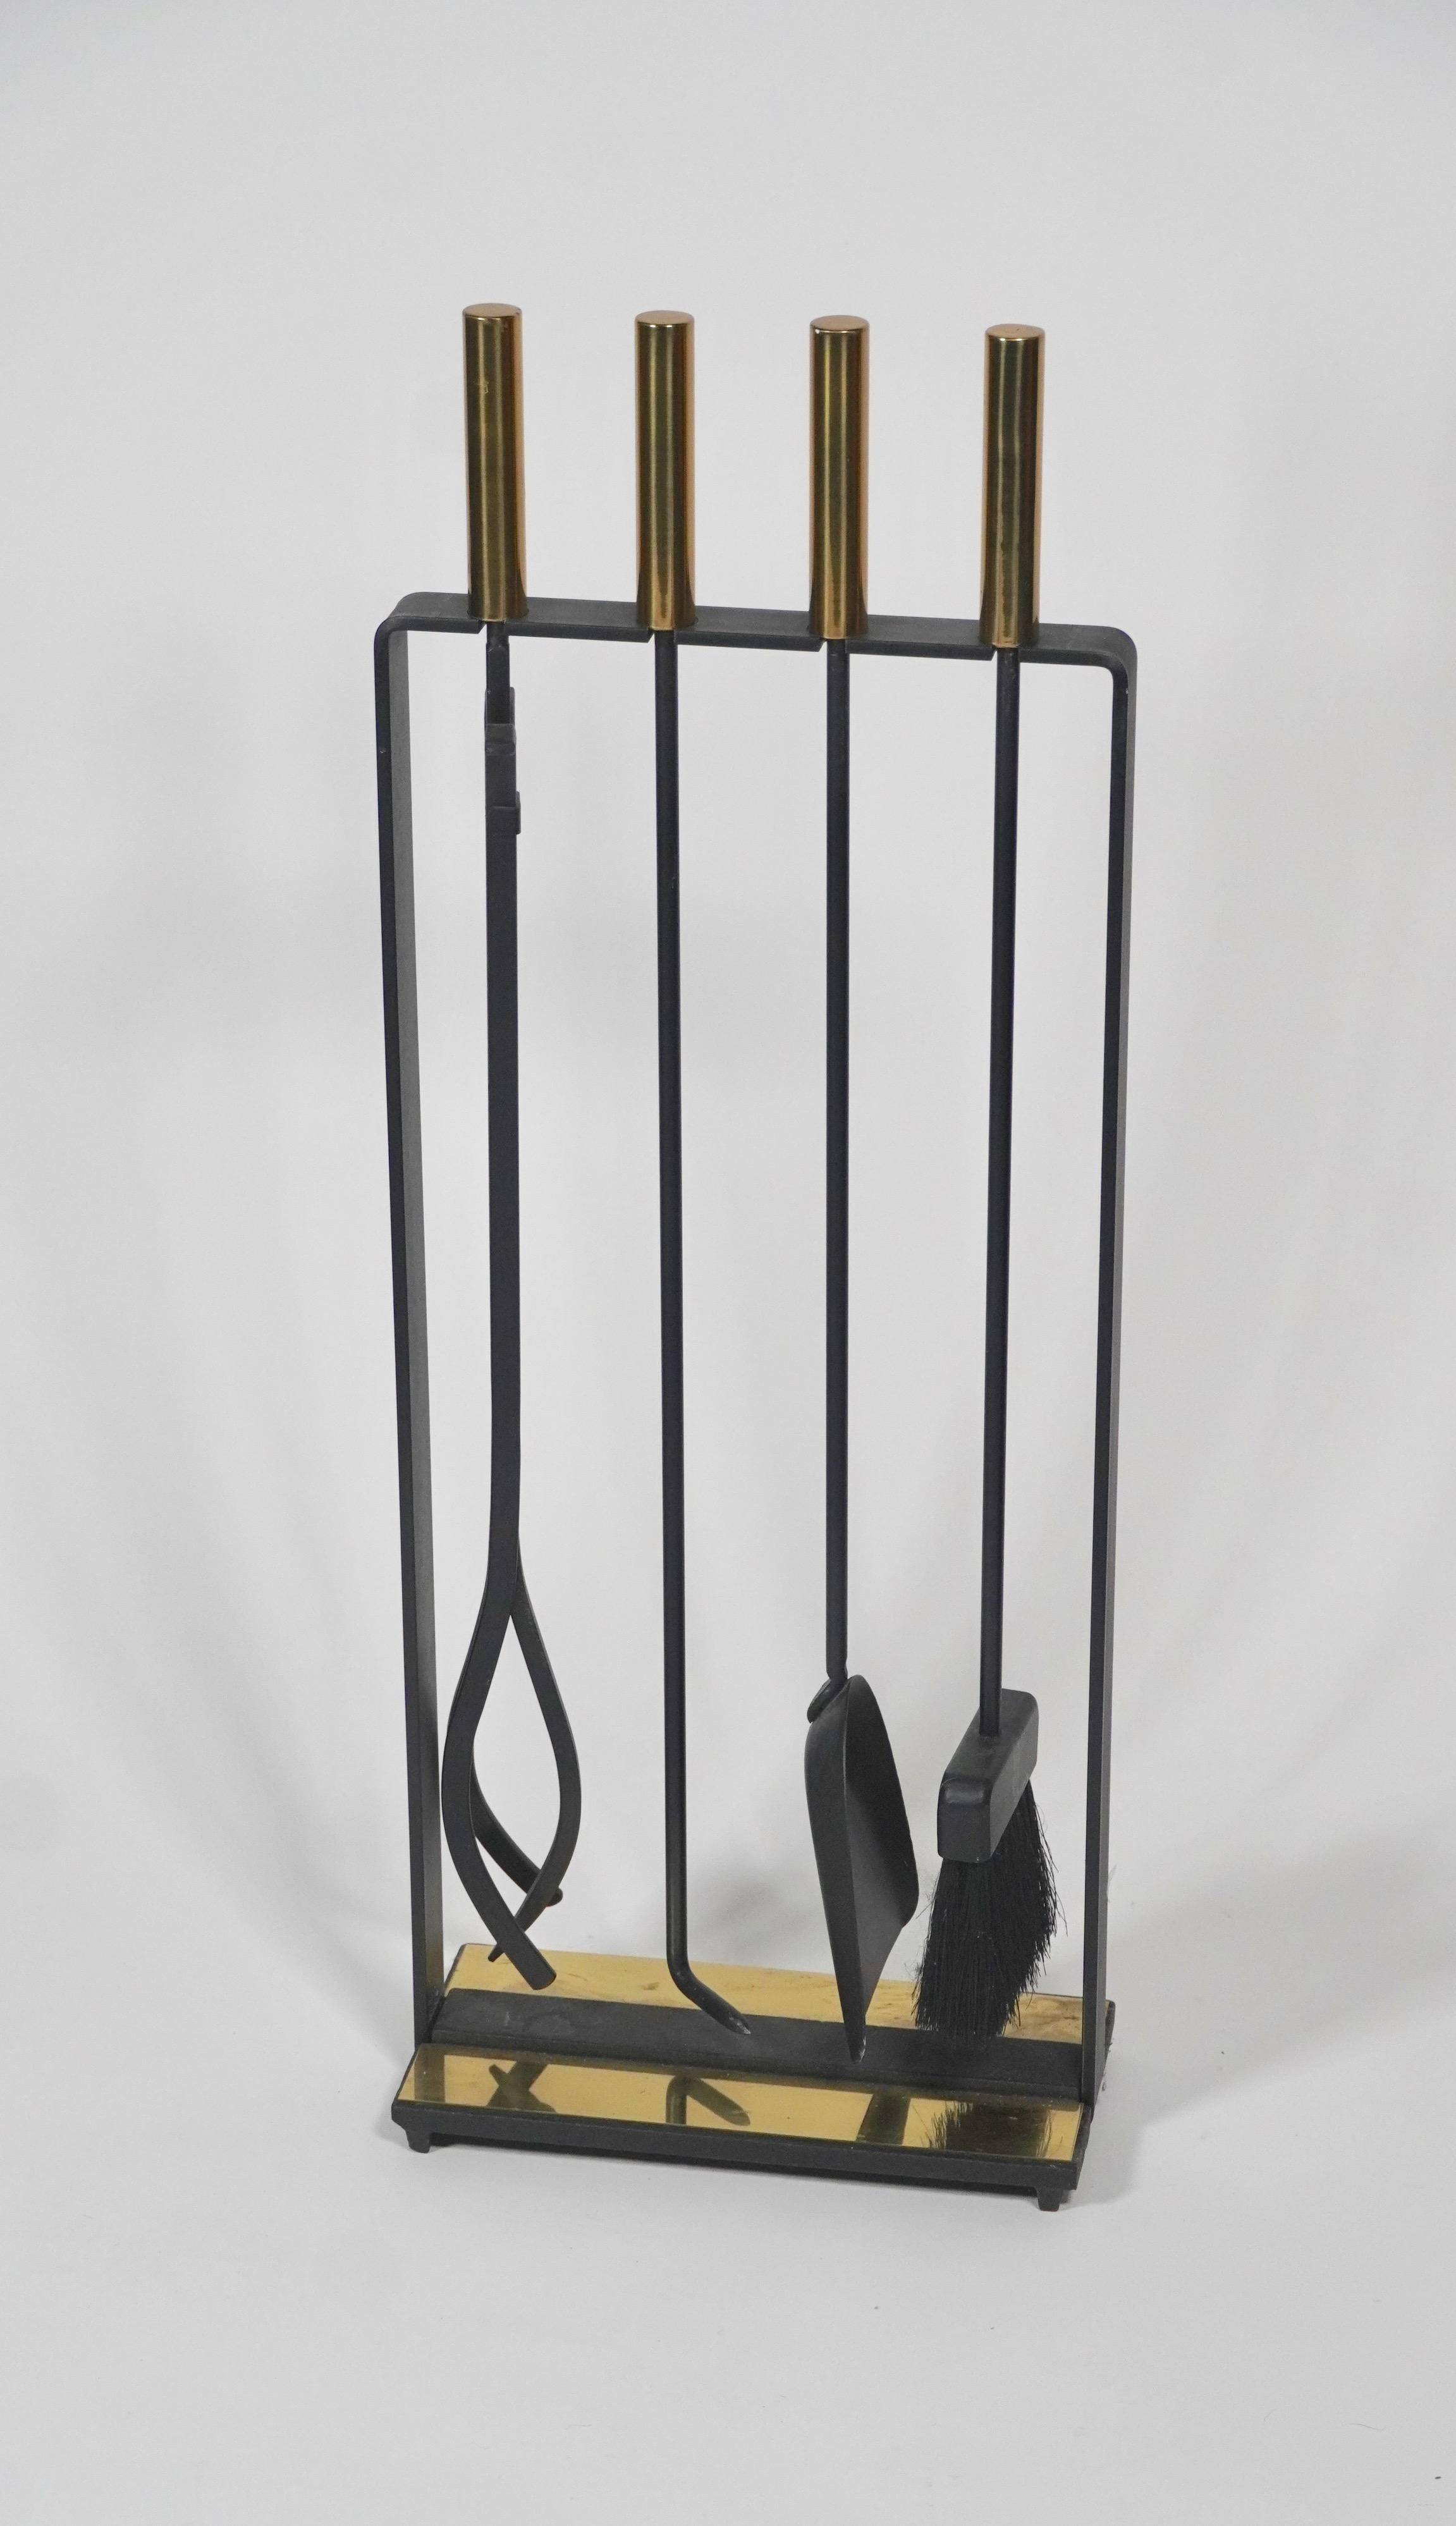 Modernist fireplace tools by Pilgrim of the United States, solid brass handles and brass base plate accent on a black cast iron and metal frame. The set includes a dust pan, brush, poker and log grabber. The brass accents are a uncommon combination